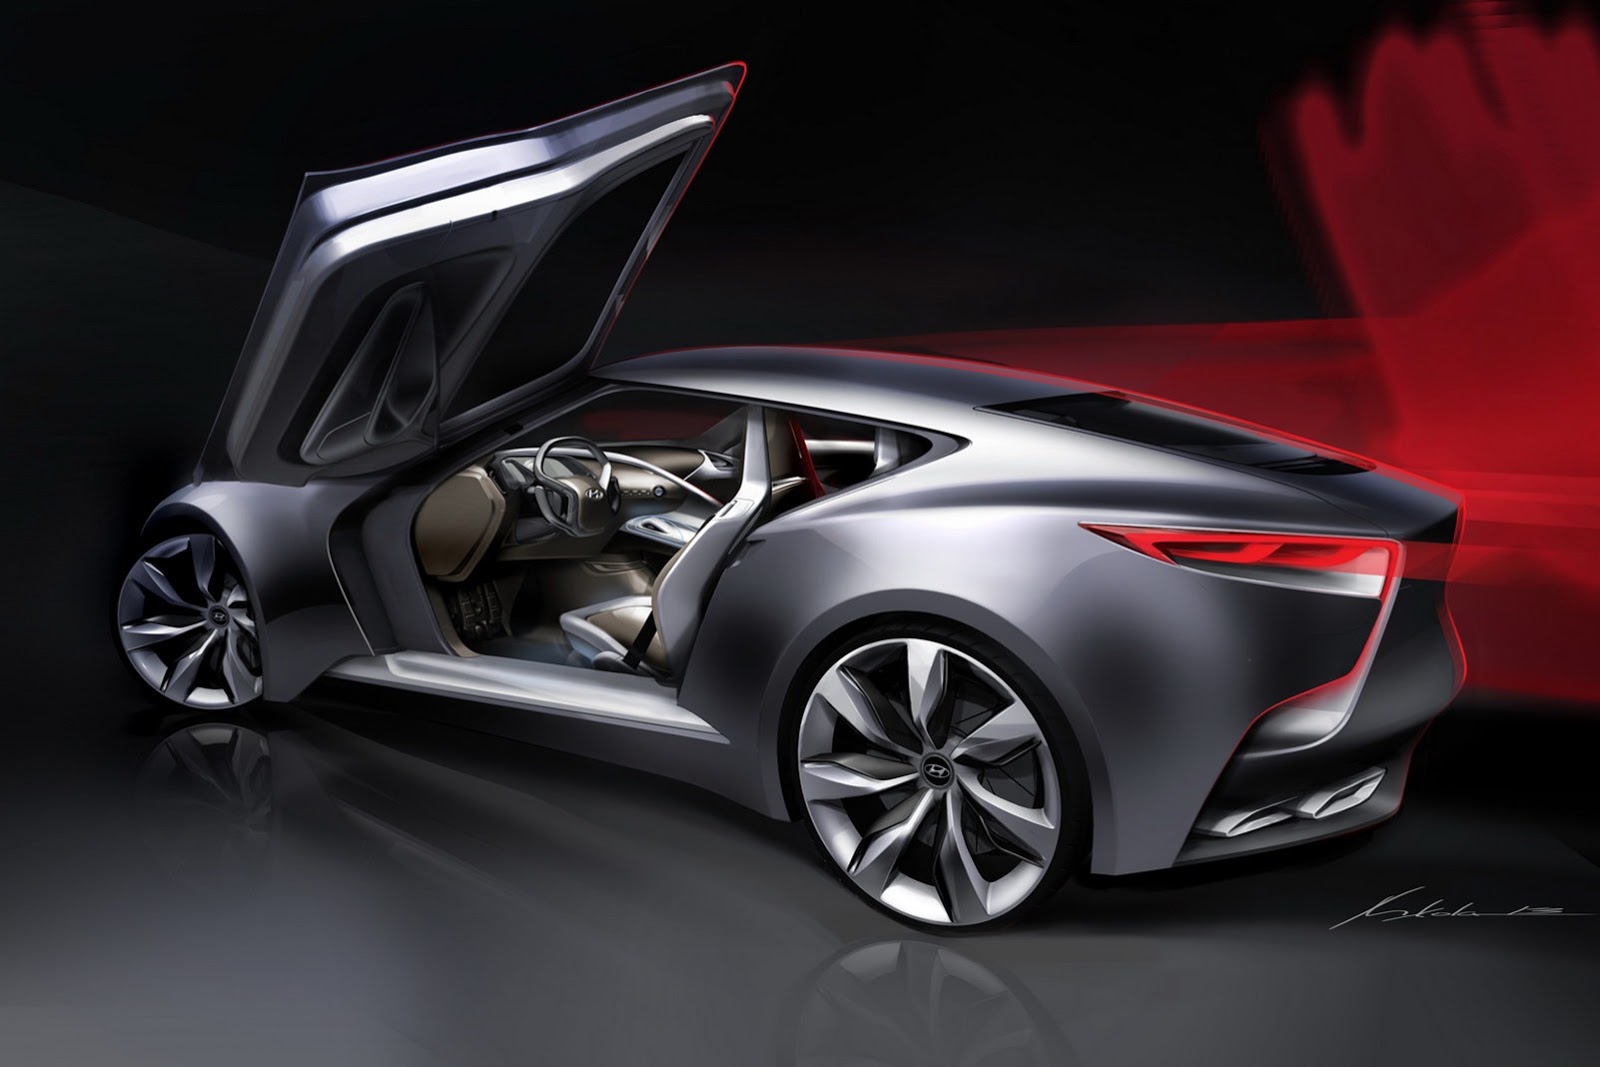 2015 Hyundai Genesis Coupe Previewed With Hnd 9 Concept Performancedrive